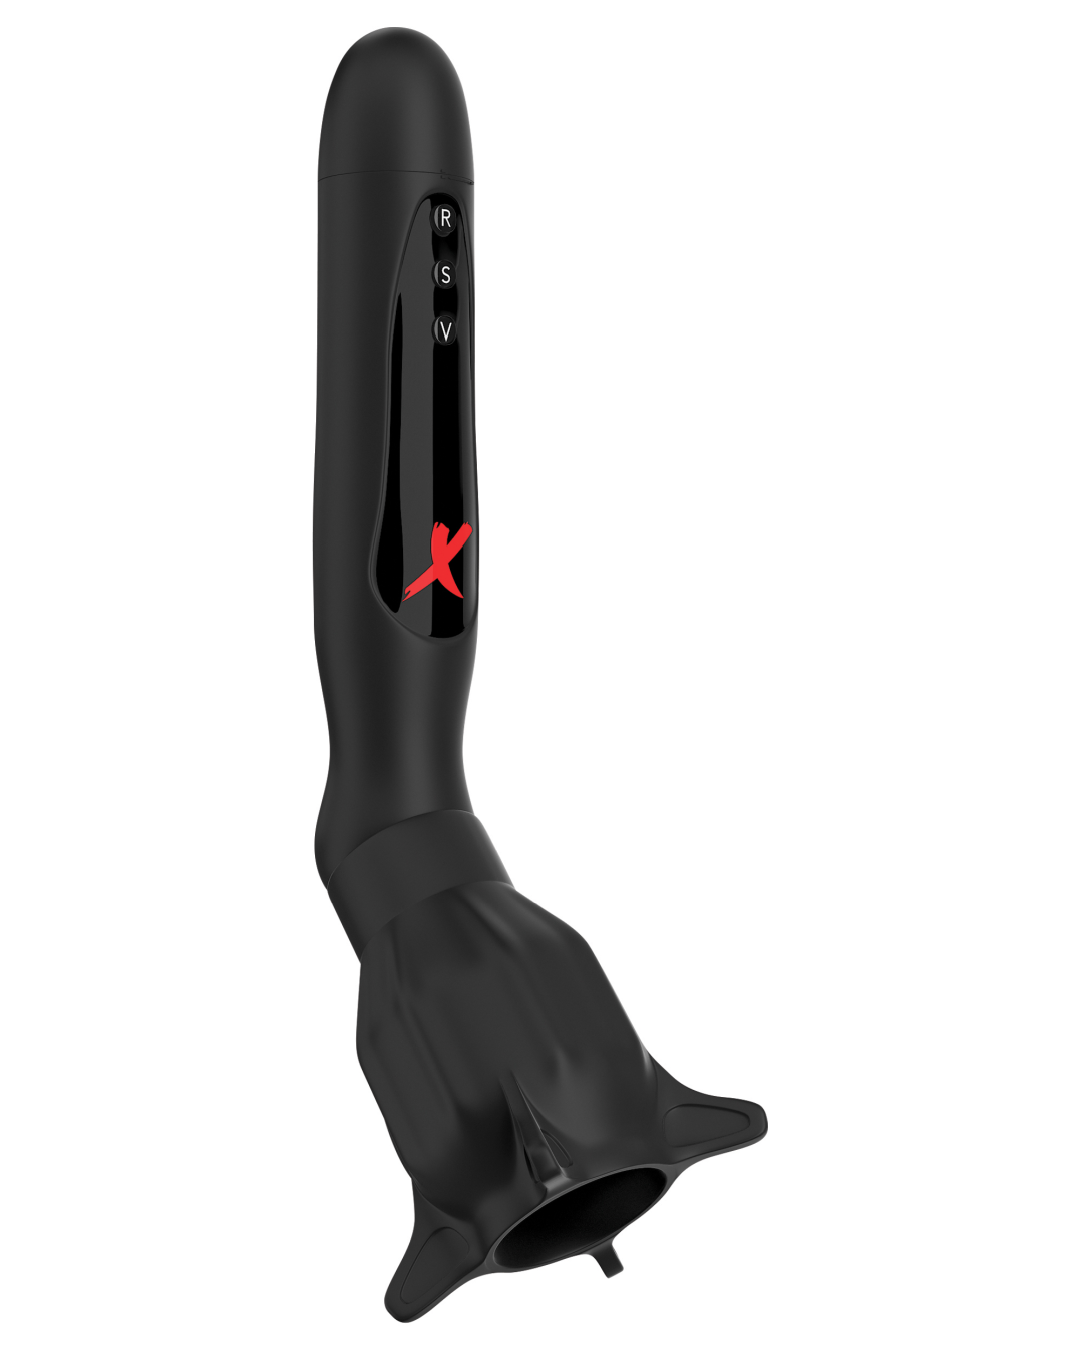 PDX Roto Sucker Suction and Vibration Penis Stroker  side view 